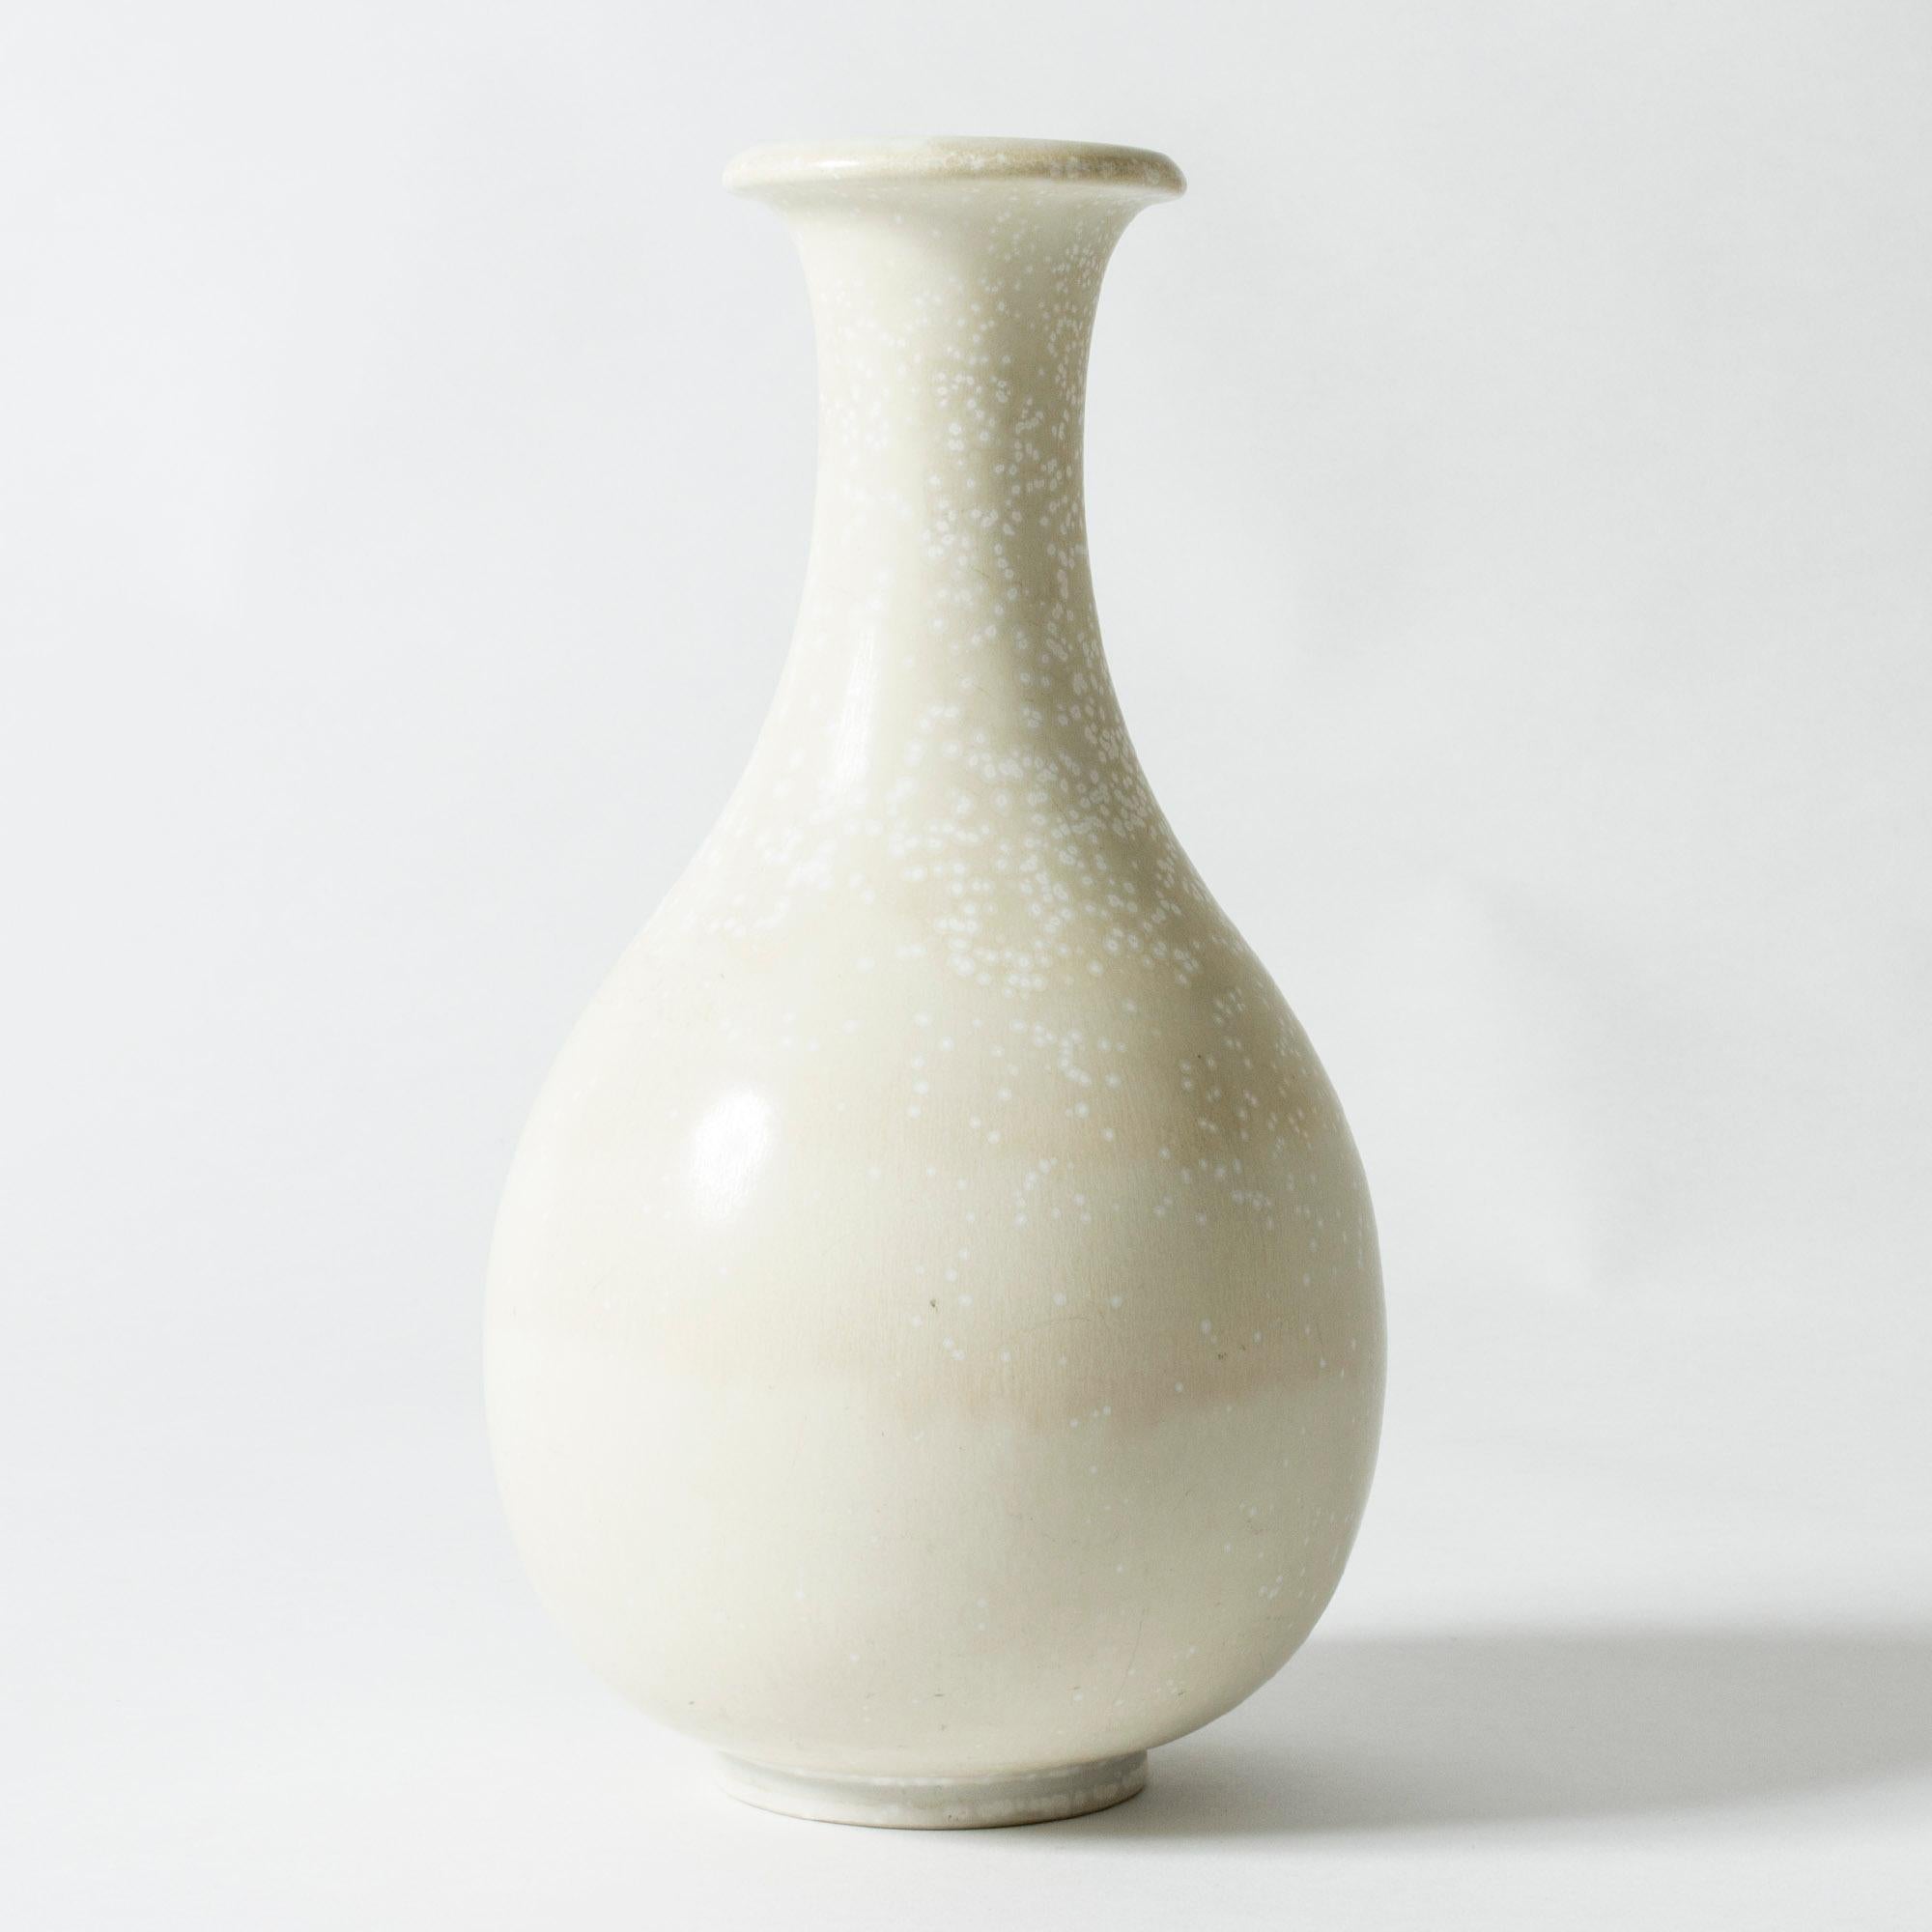 Stoneware vase by Gunnar Nylund, in a beautiful, curvesome form. Glazed eggshell white with a lovely mimosa pattern.

Gunnar Nylund was one of the most influential ceramicists and designers of the Swedish mid-century period. He was Rörstrand’s